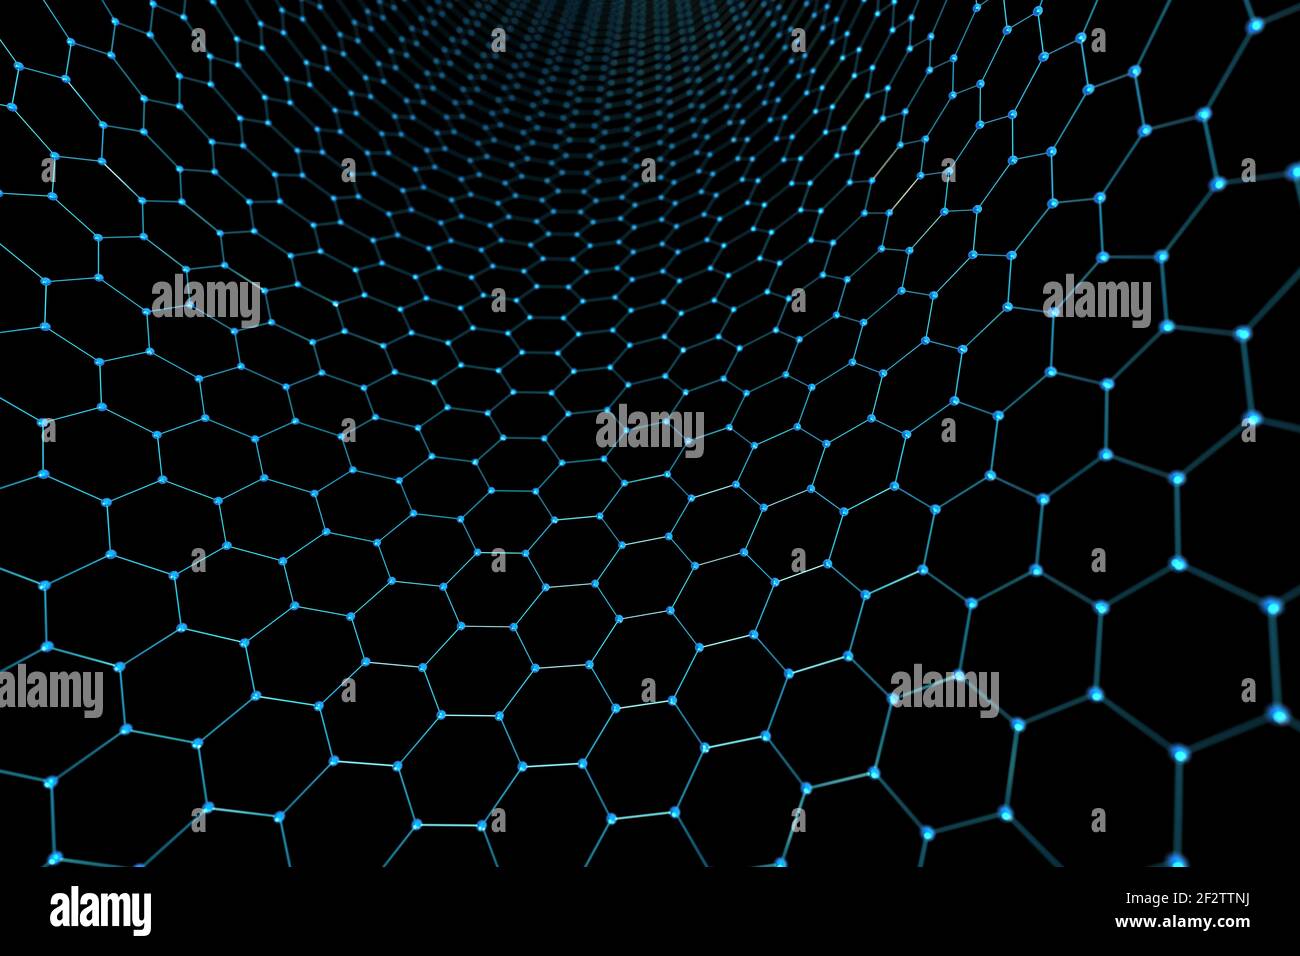 Abstract hexagon and spheres background. Connection and technology concept. 3d illustration. Stock Photo